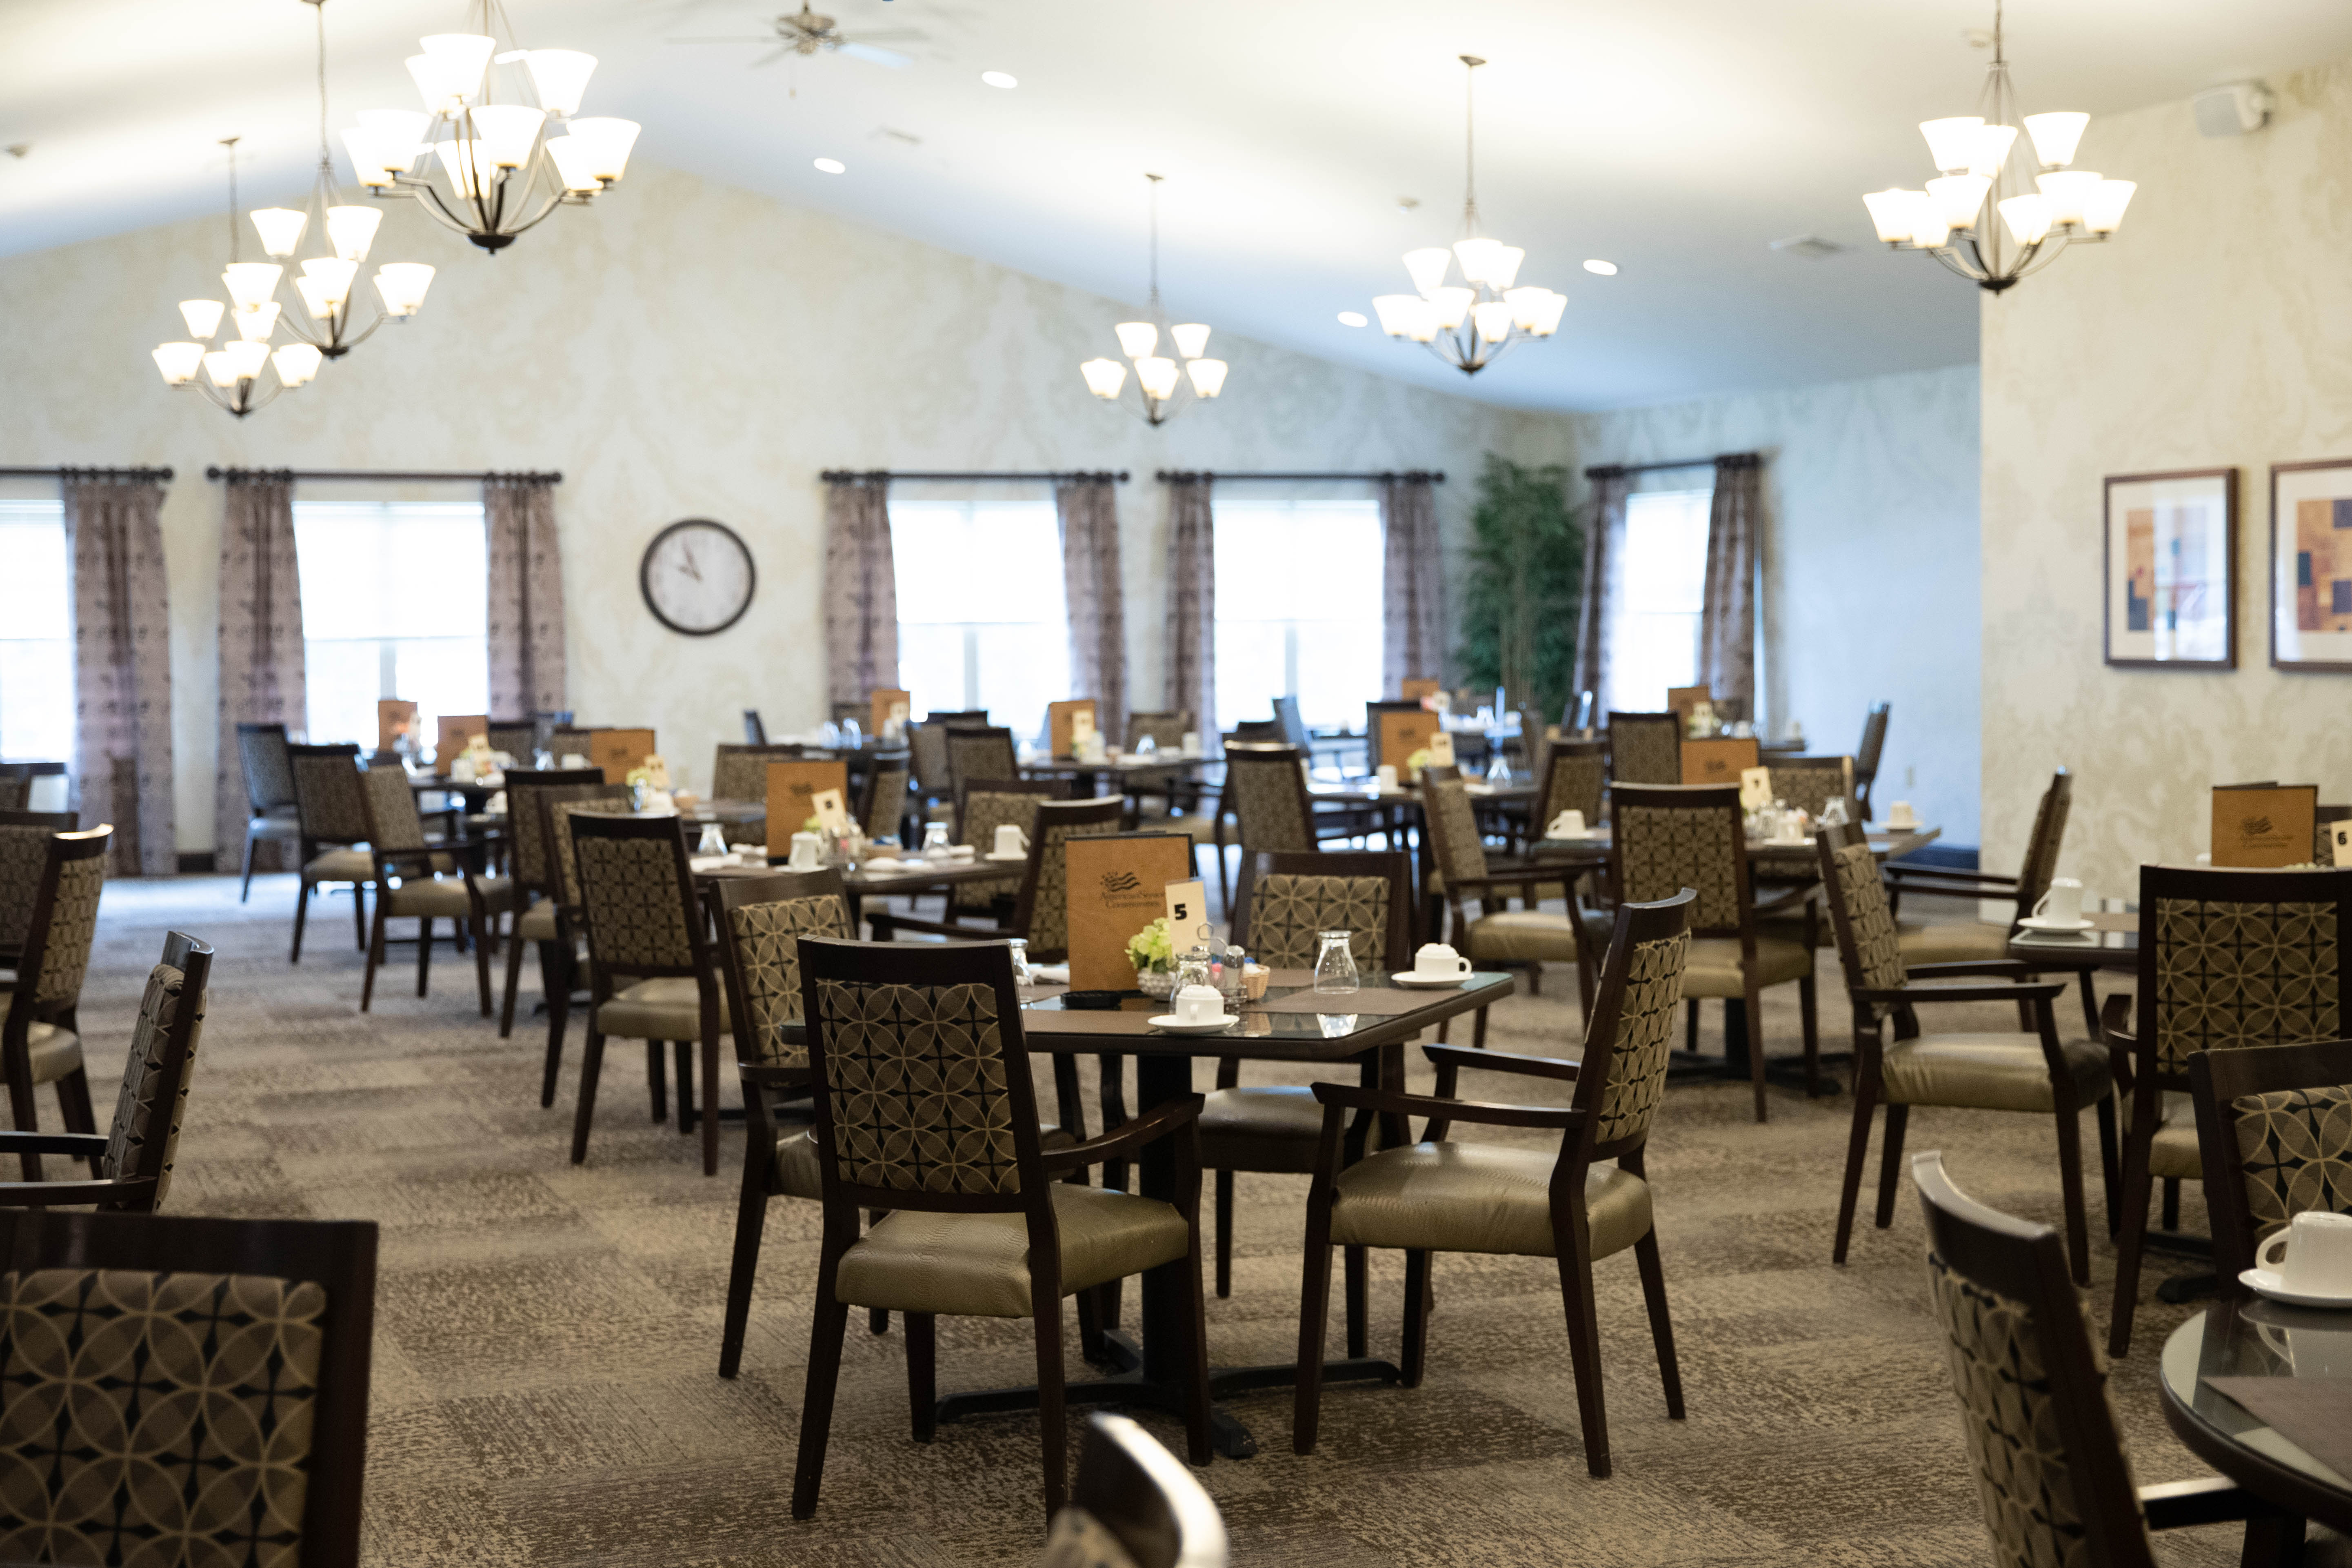 <span  class="uc_style_uc_tiles_grid_image_elementor_uc_items_attribute_title" style="color:#000000;">The dining room at the Aster Place Assisted Living Apartments. </span>